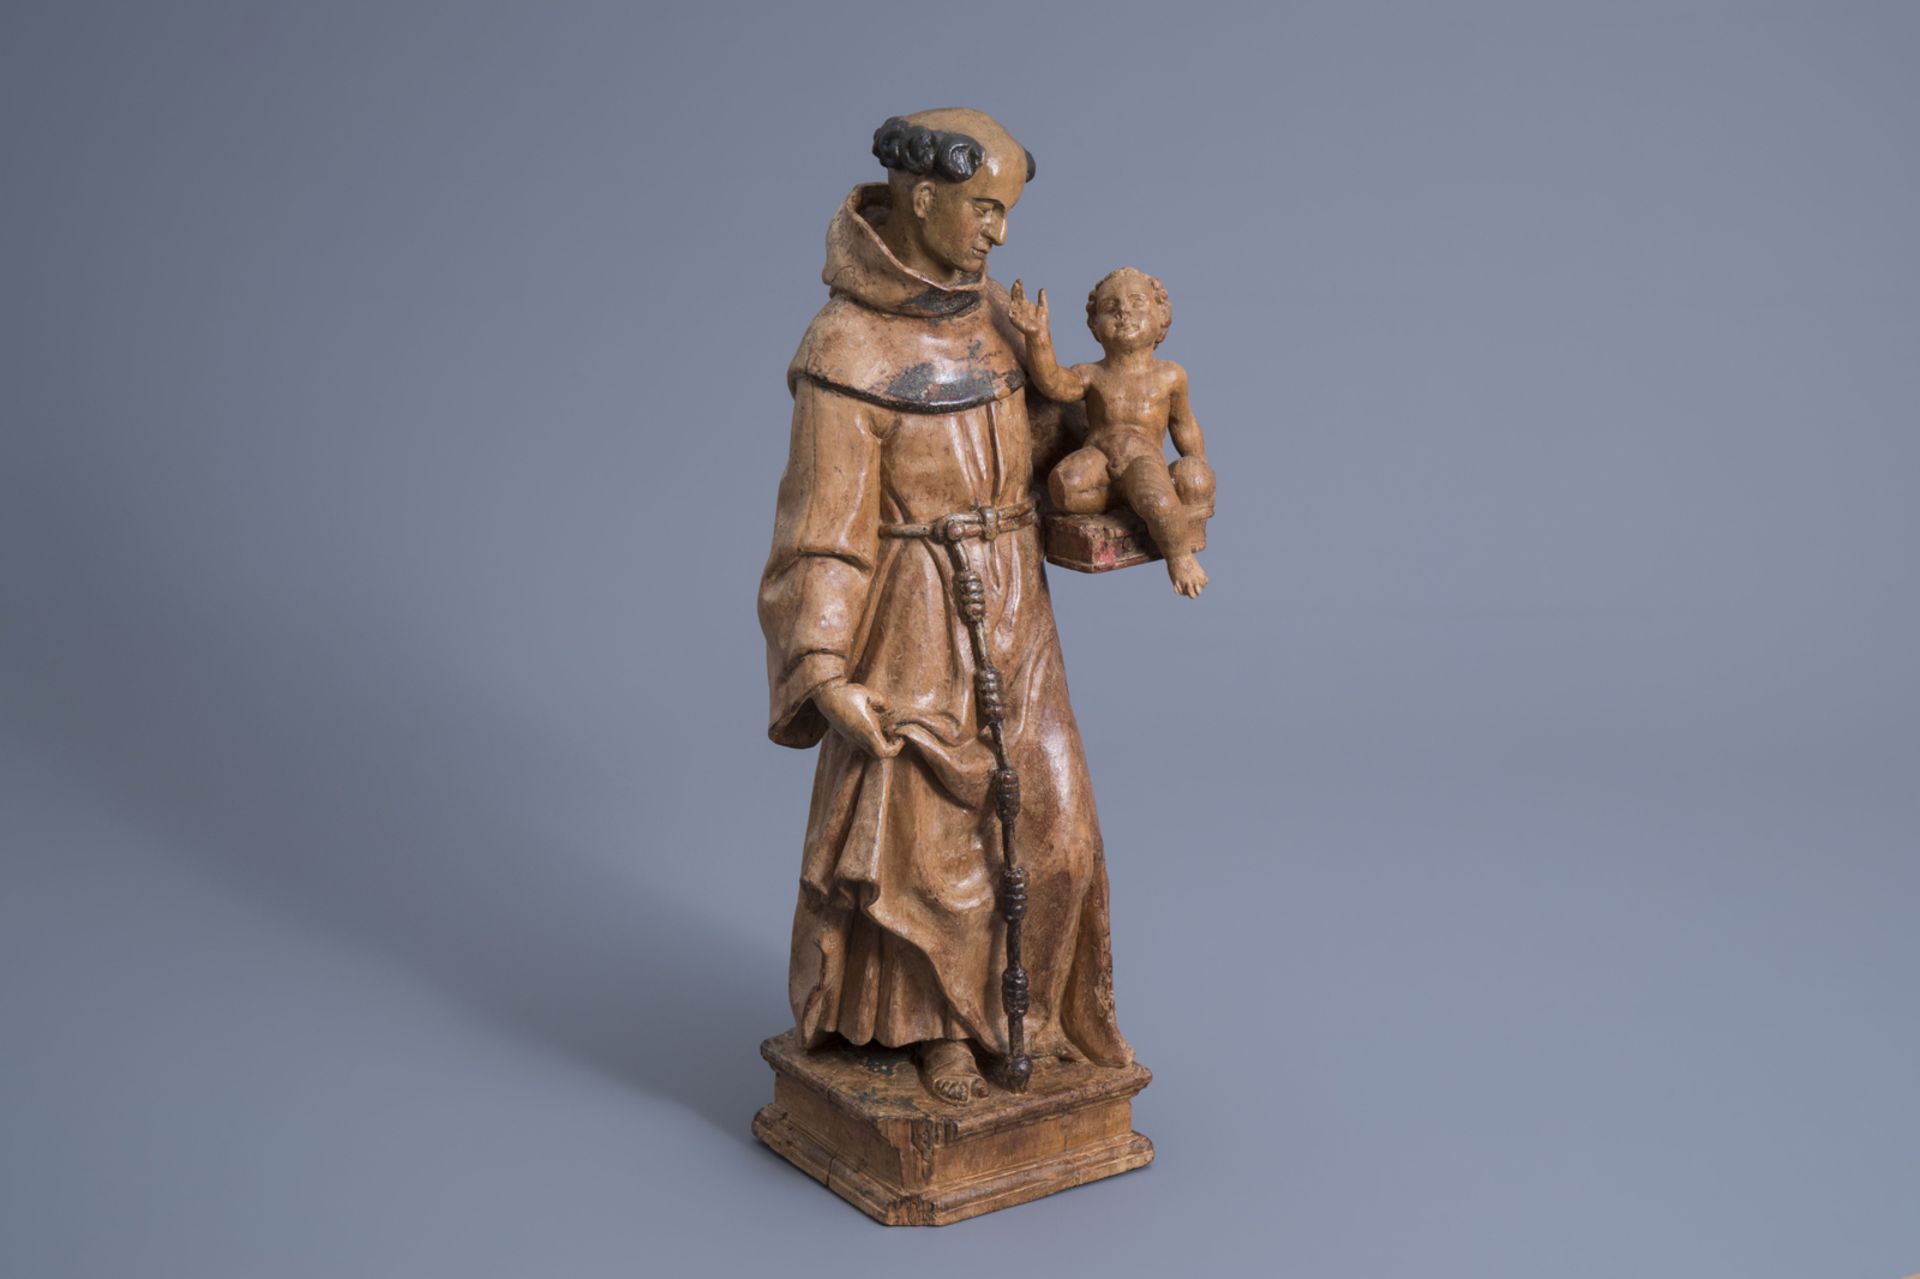 A carved wooden figure of Saint Anthony of Padua with Child, the Netherlands, 16th C.